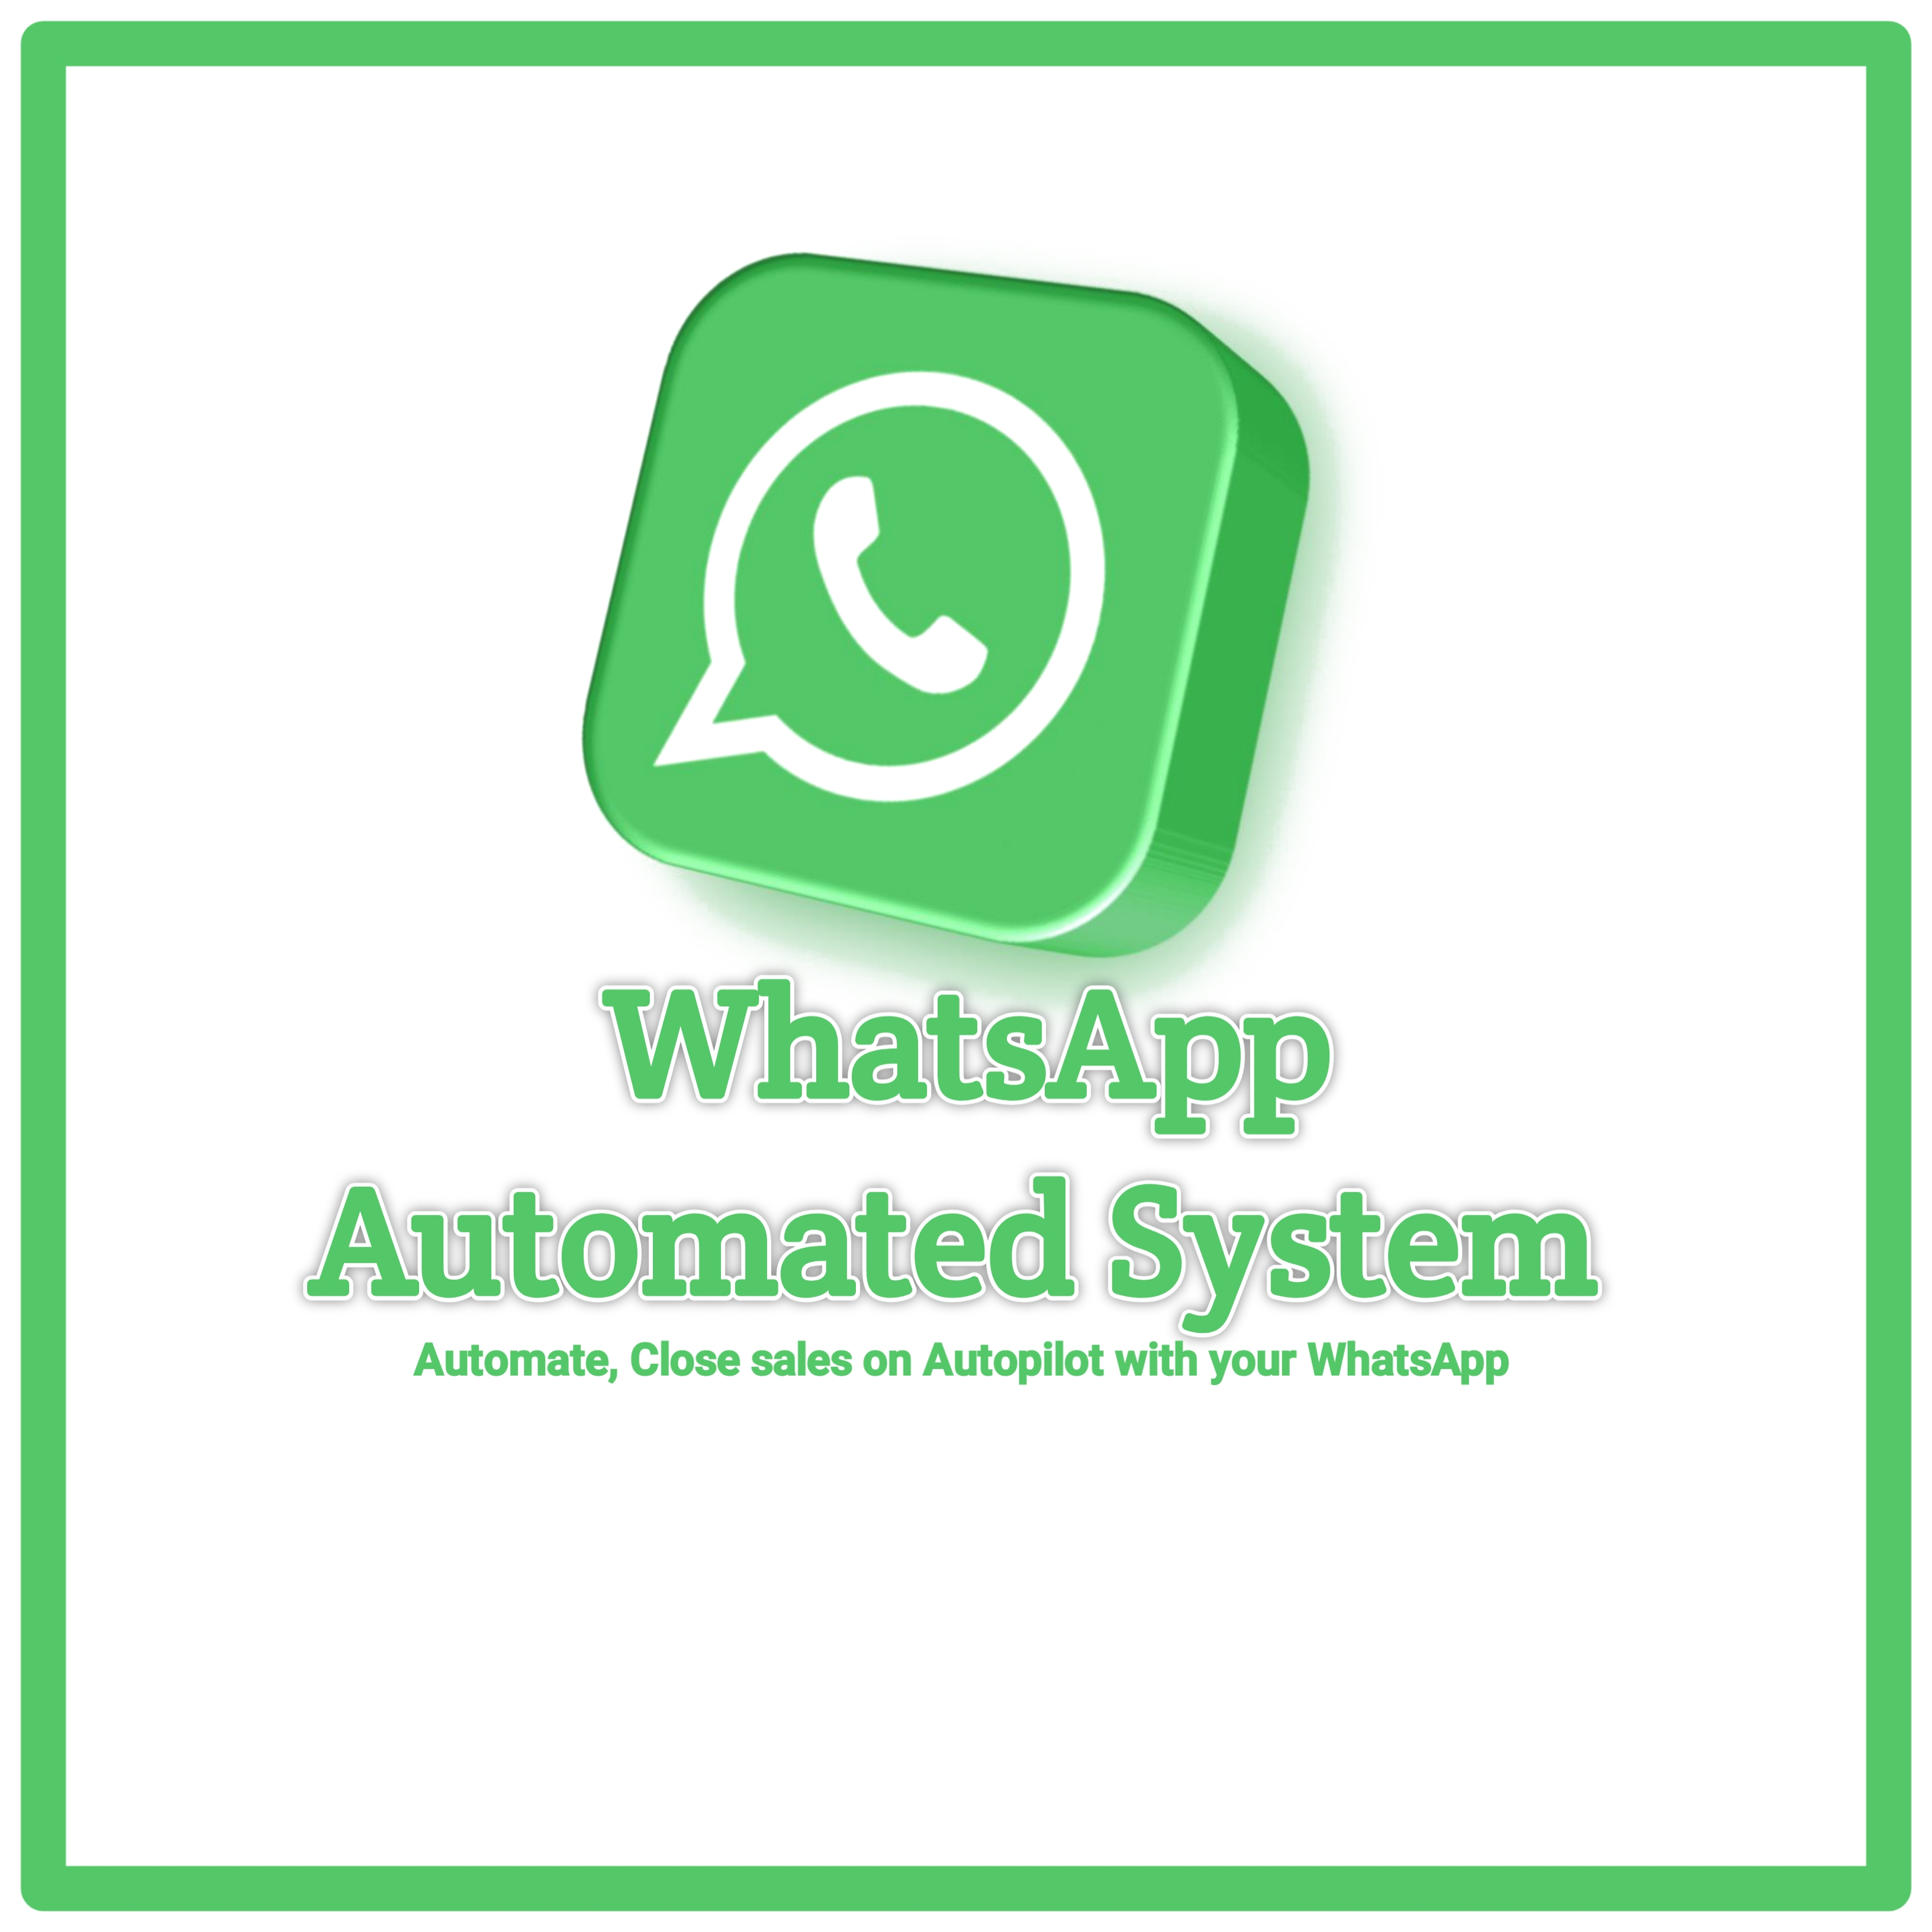 WhatsApp Automated System